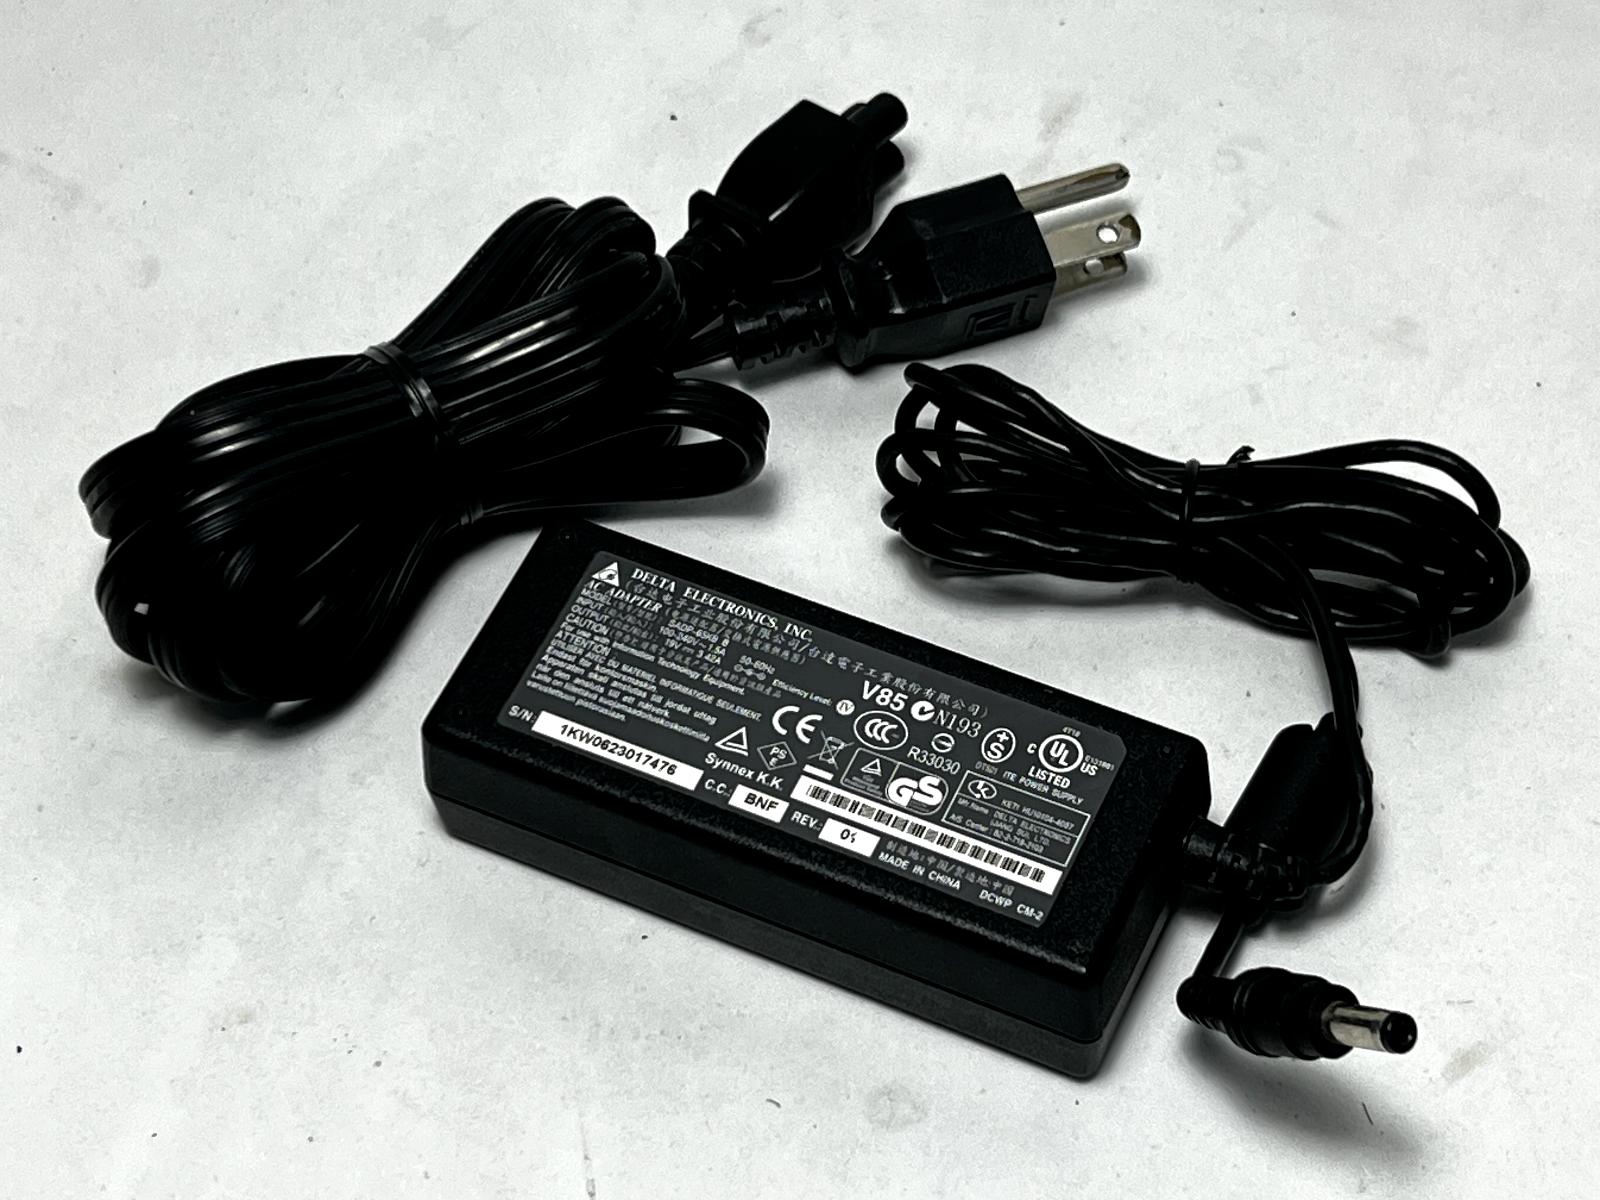  Genuine 65W 19V 3.42A AC Adapter Charger For Toshiba Laptop Power Supply Cord   - $16.82